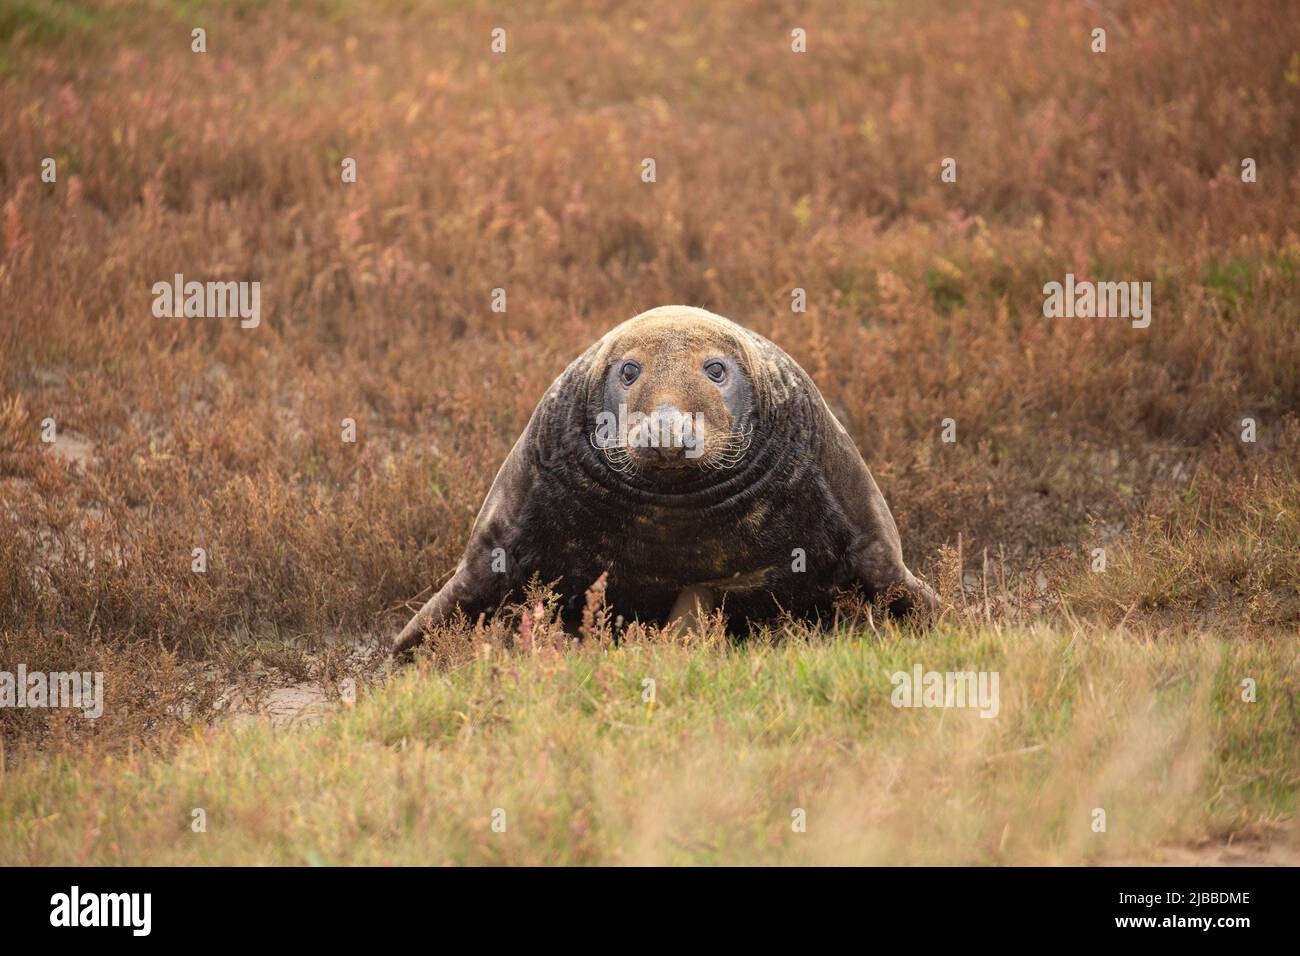 Seal in vegetation looking up and standing on front legs at Horsey gap in Norfolk, UK. British wildlife Stock Photo